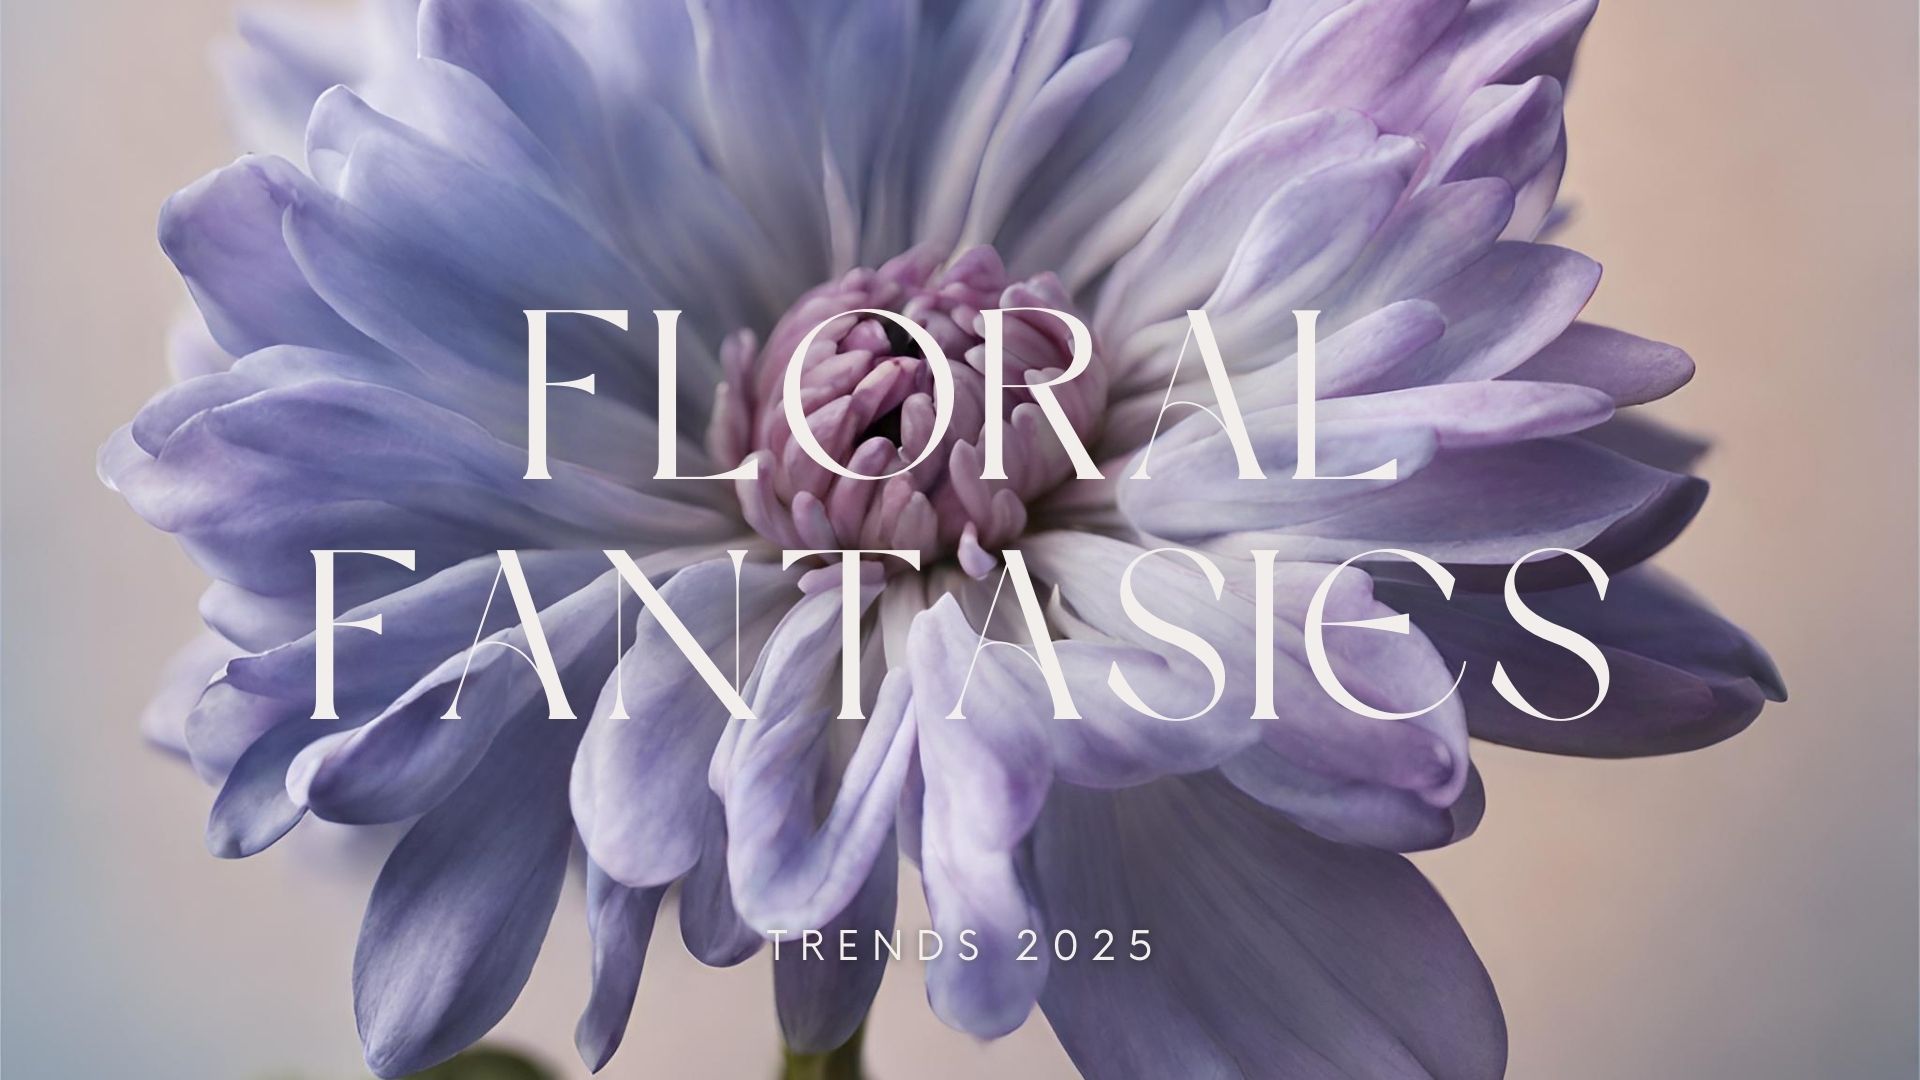 Floral Fantasies Report – Trend 2025 Interiors & Fashion - Moods Interior  Trends